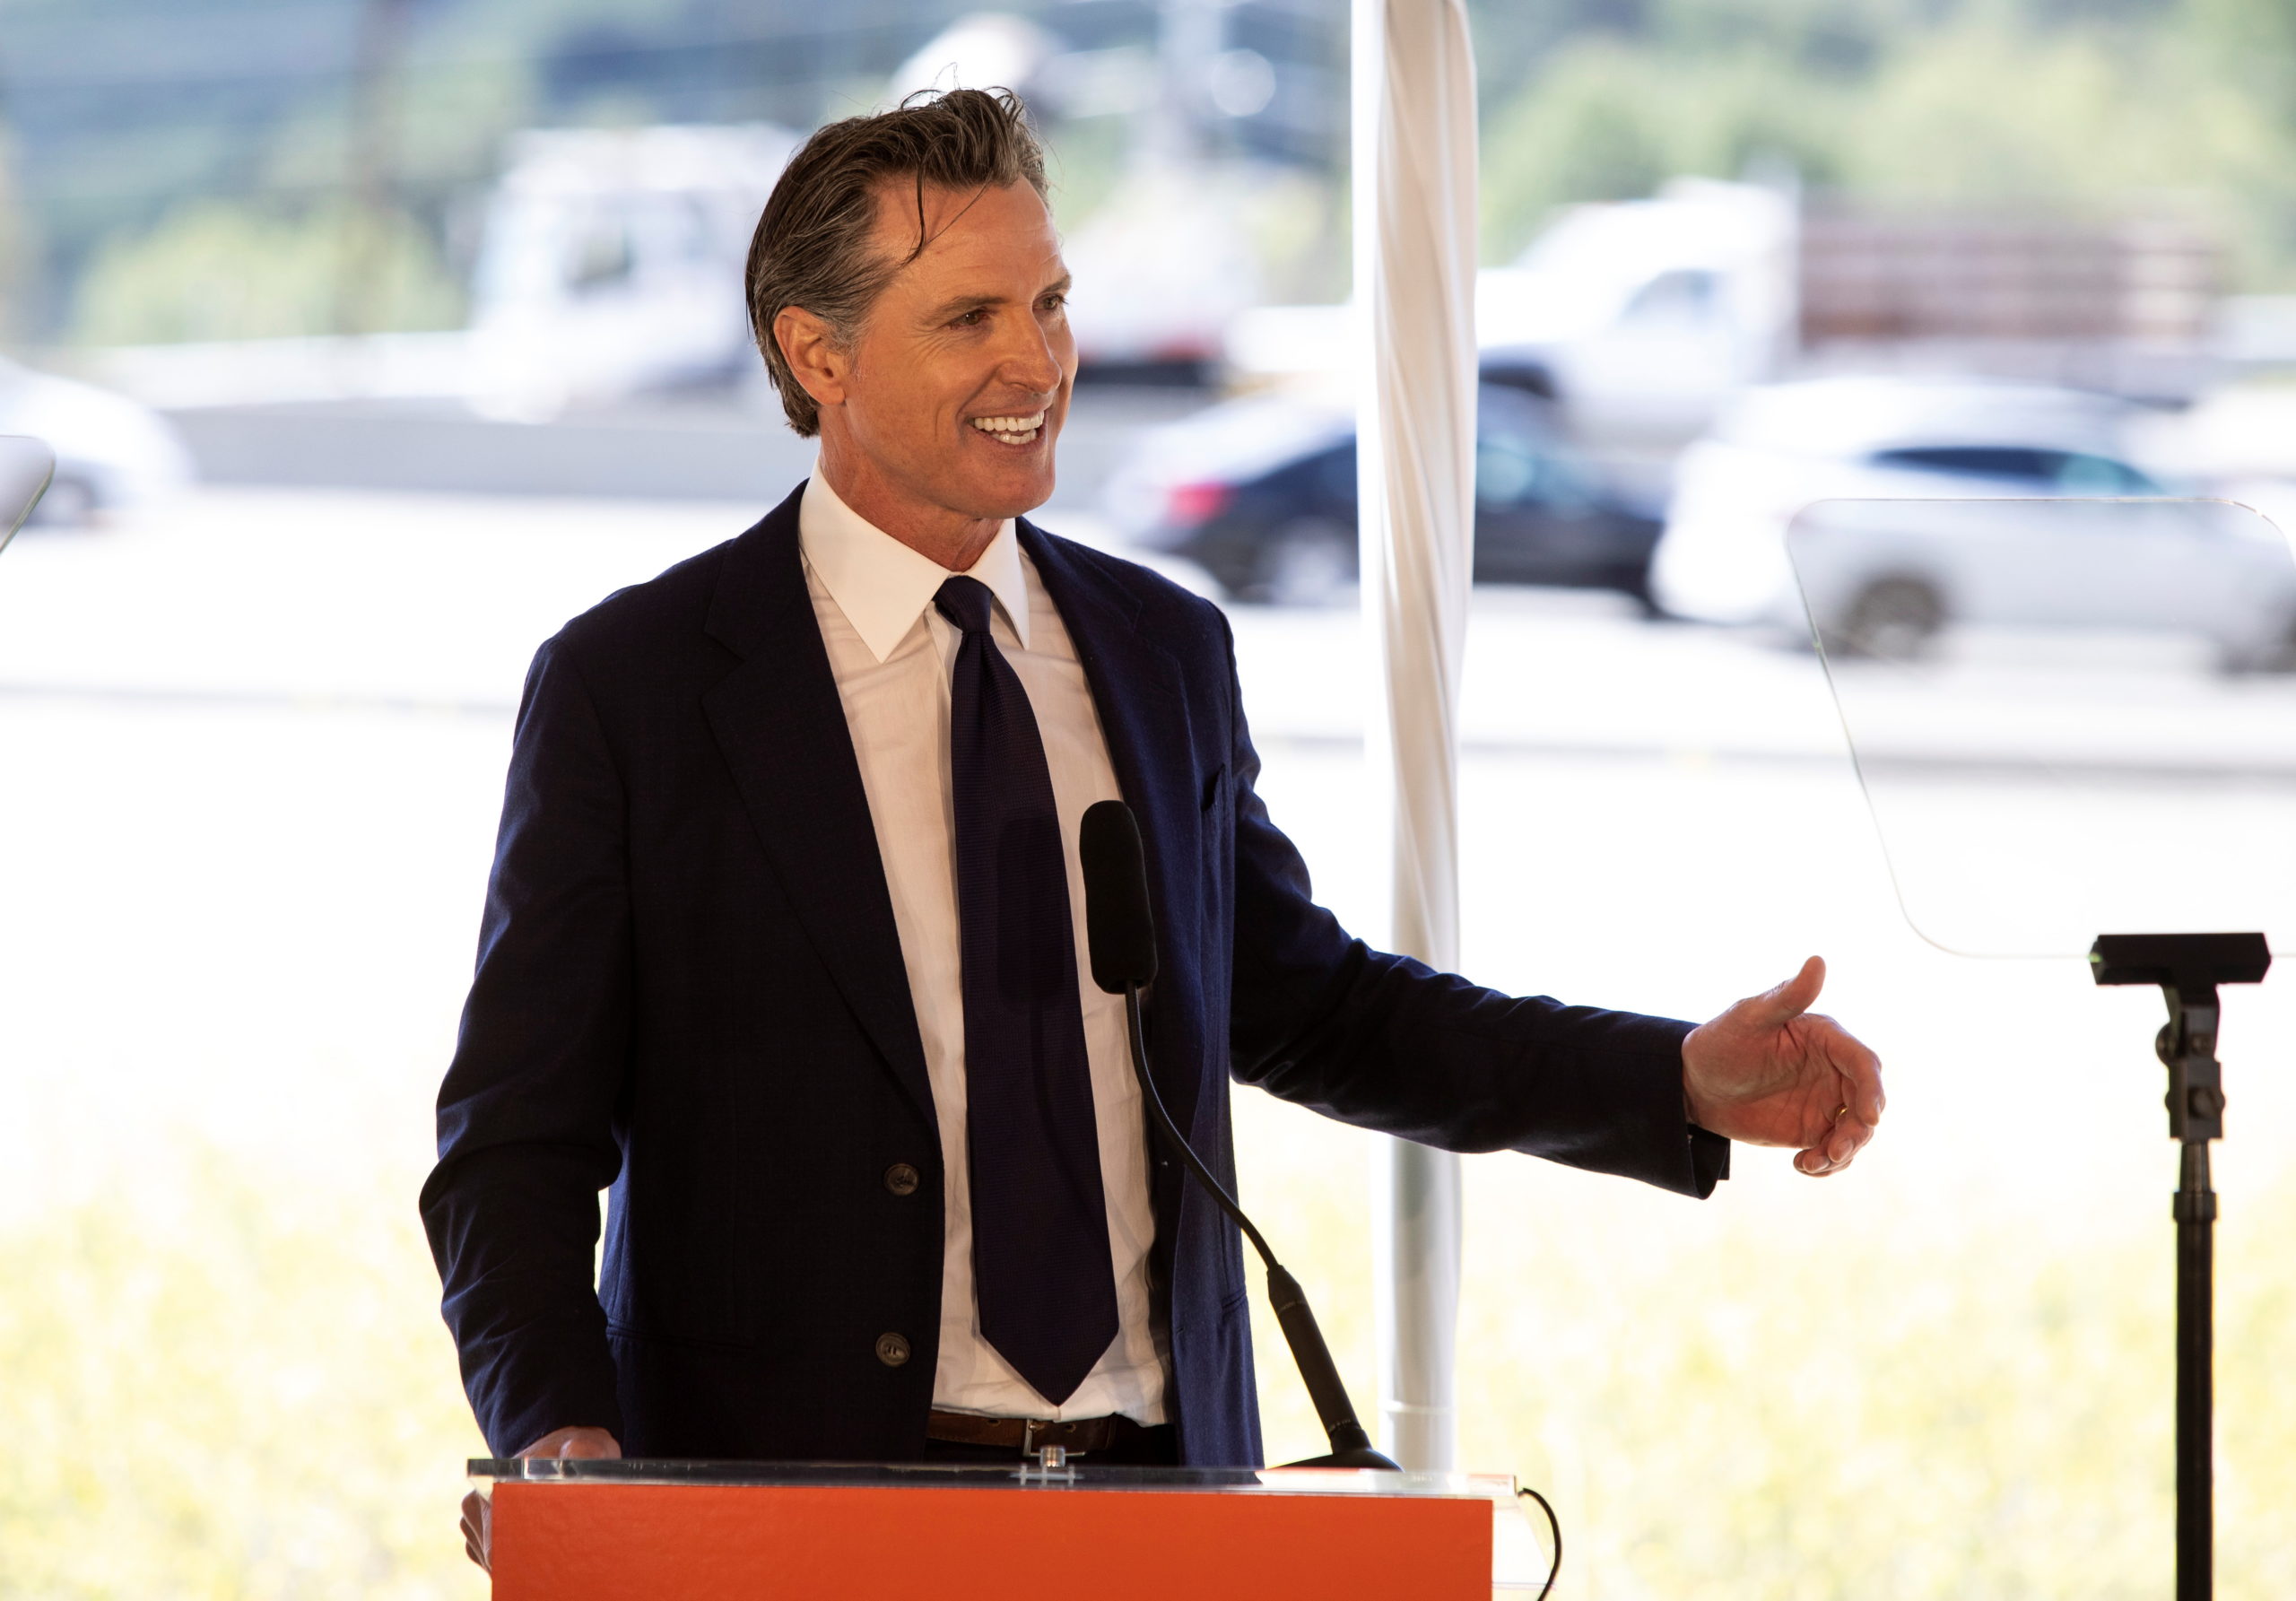 California Governor Gavin Newsom speaks during the groundbreaking ceremony for the "Wallis Annenberg Wildlife Crossing" over a major freeway in Agoura Hills, near Los Angeles, California, U.S., April 22, 2022. REUTERS/Aude Guerrucci